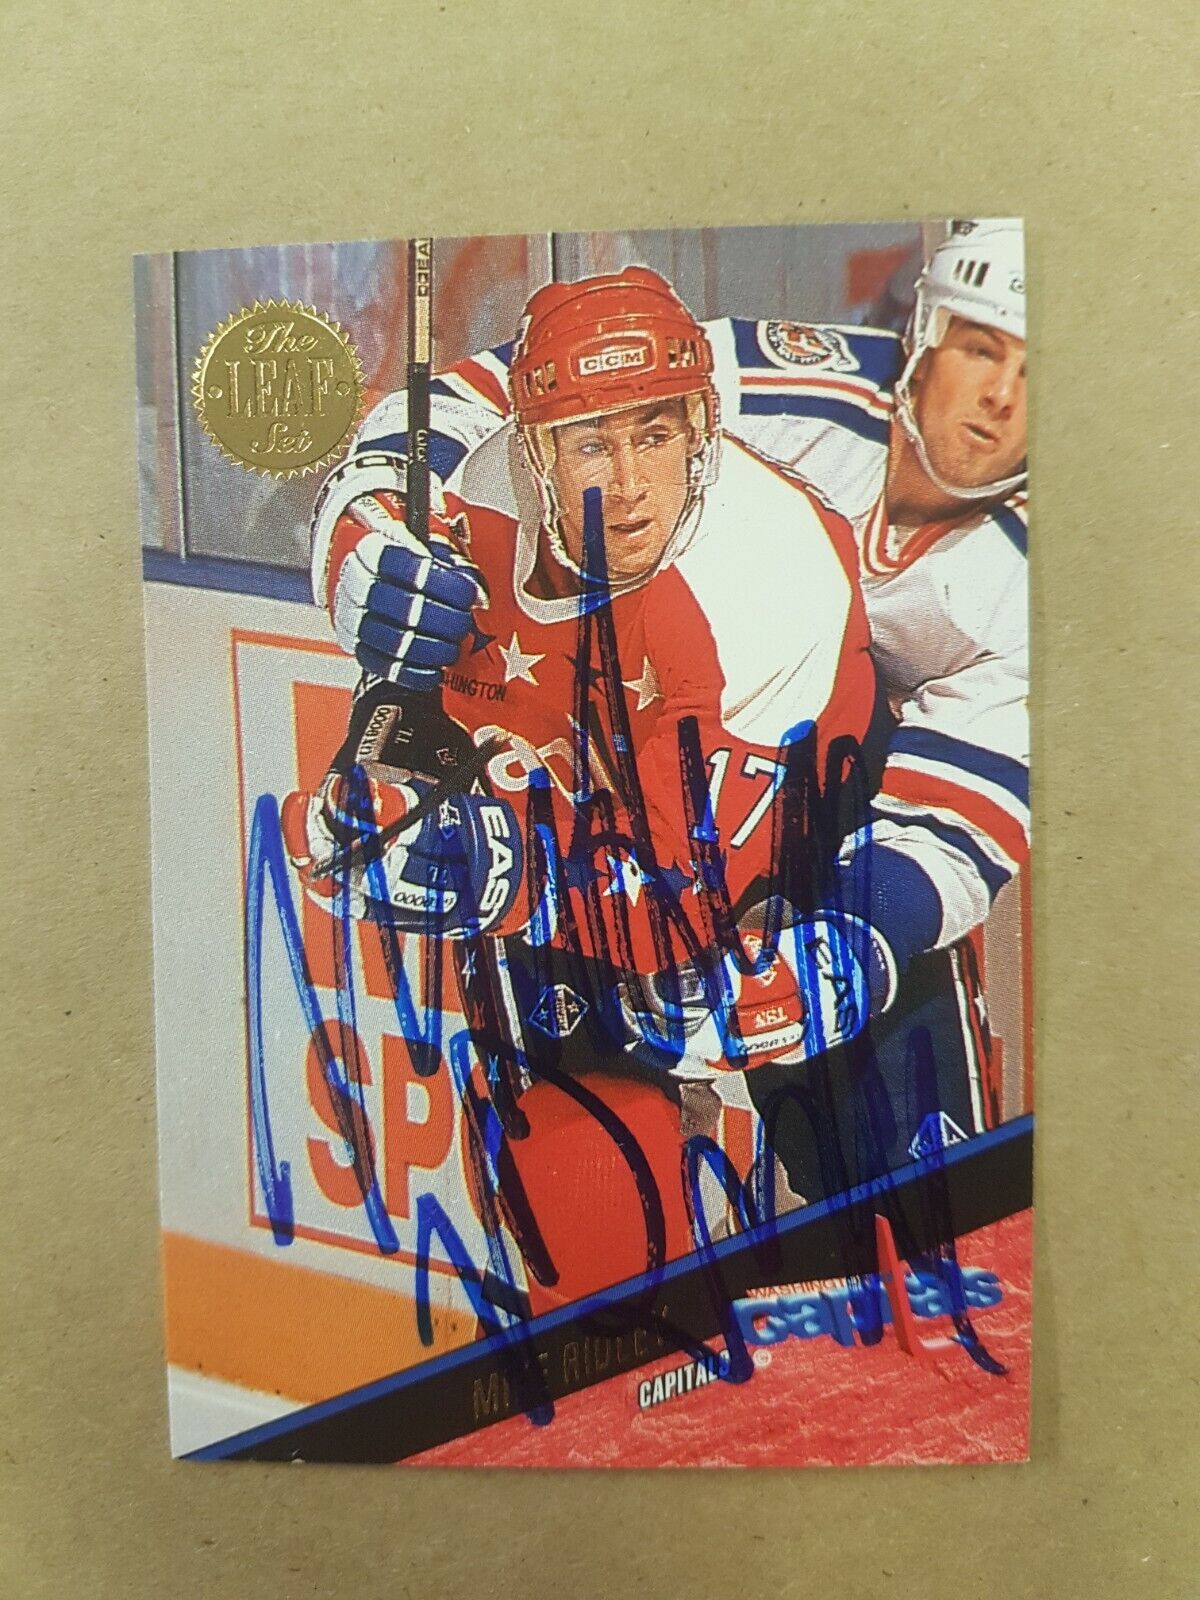 Mike Ridley Canadians Autograph Card Signed Hockey 102 1993 Leaf